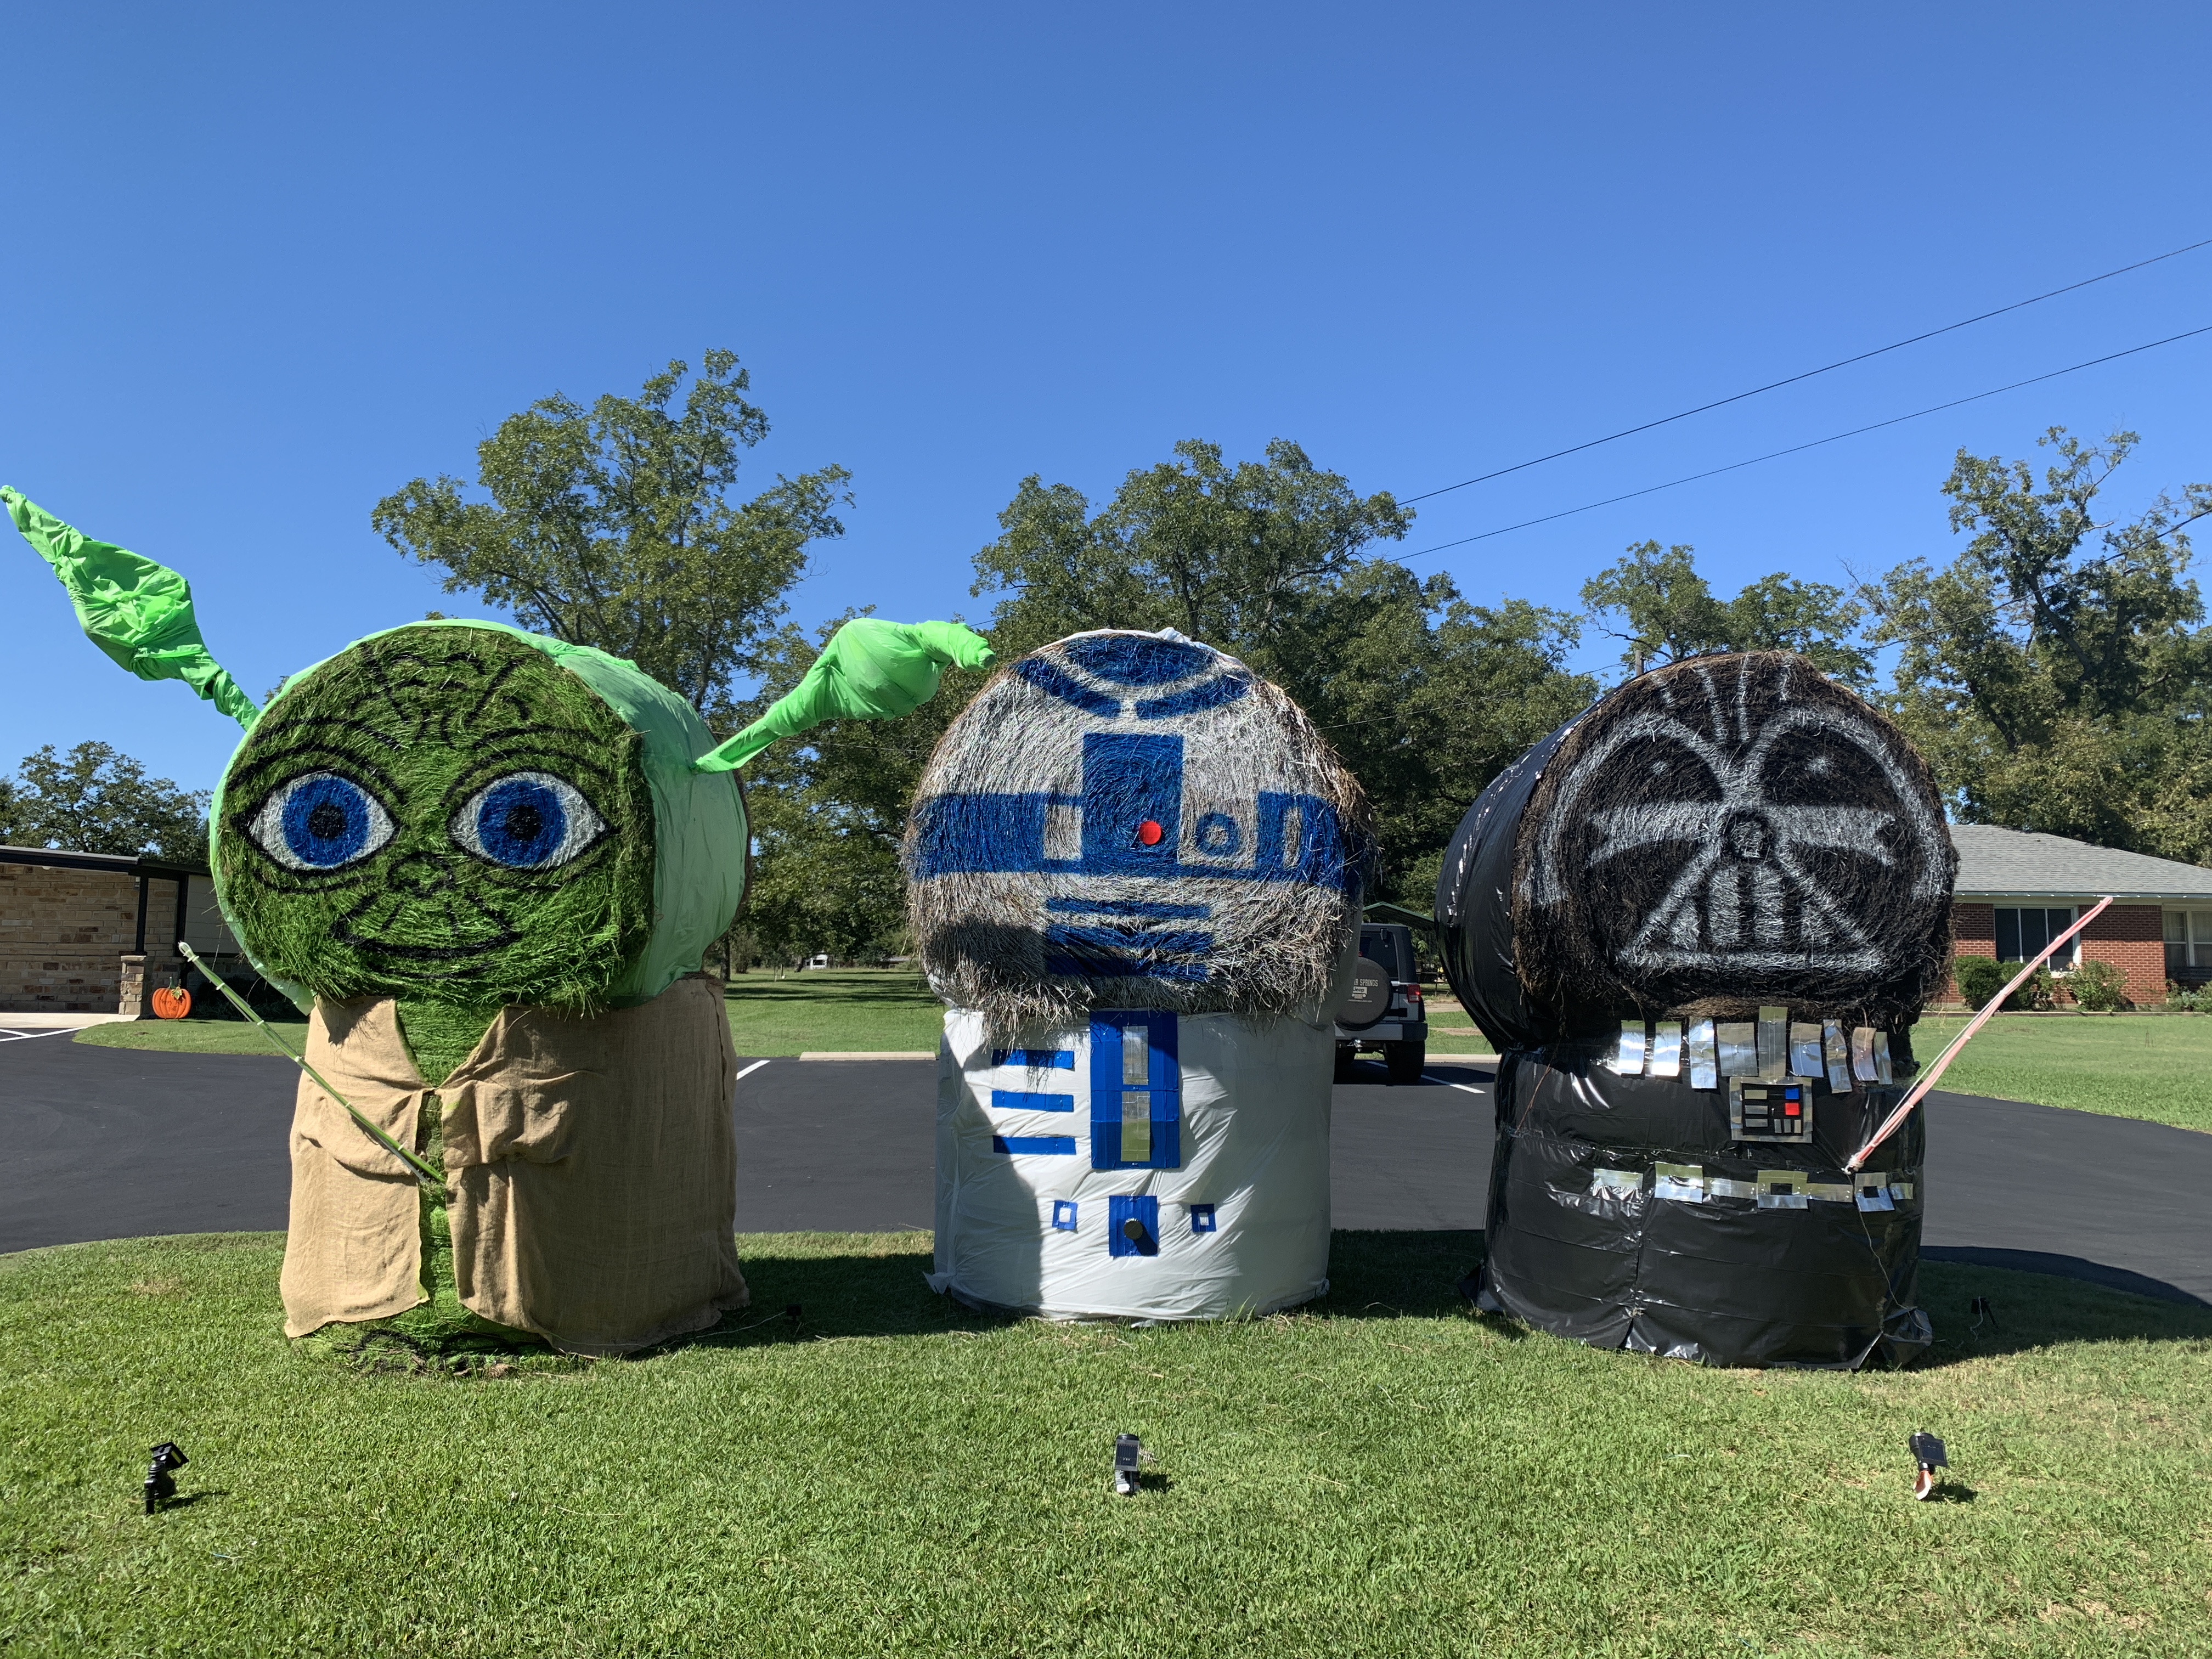 Pictures of Hay Bale Sculptures Participating in the Hopkins County Fall Festival’s Hay Bale Sculpture Contest!